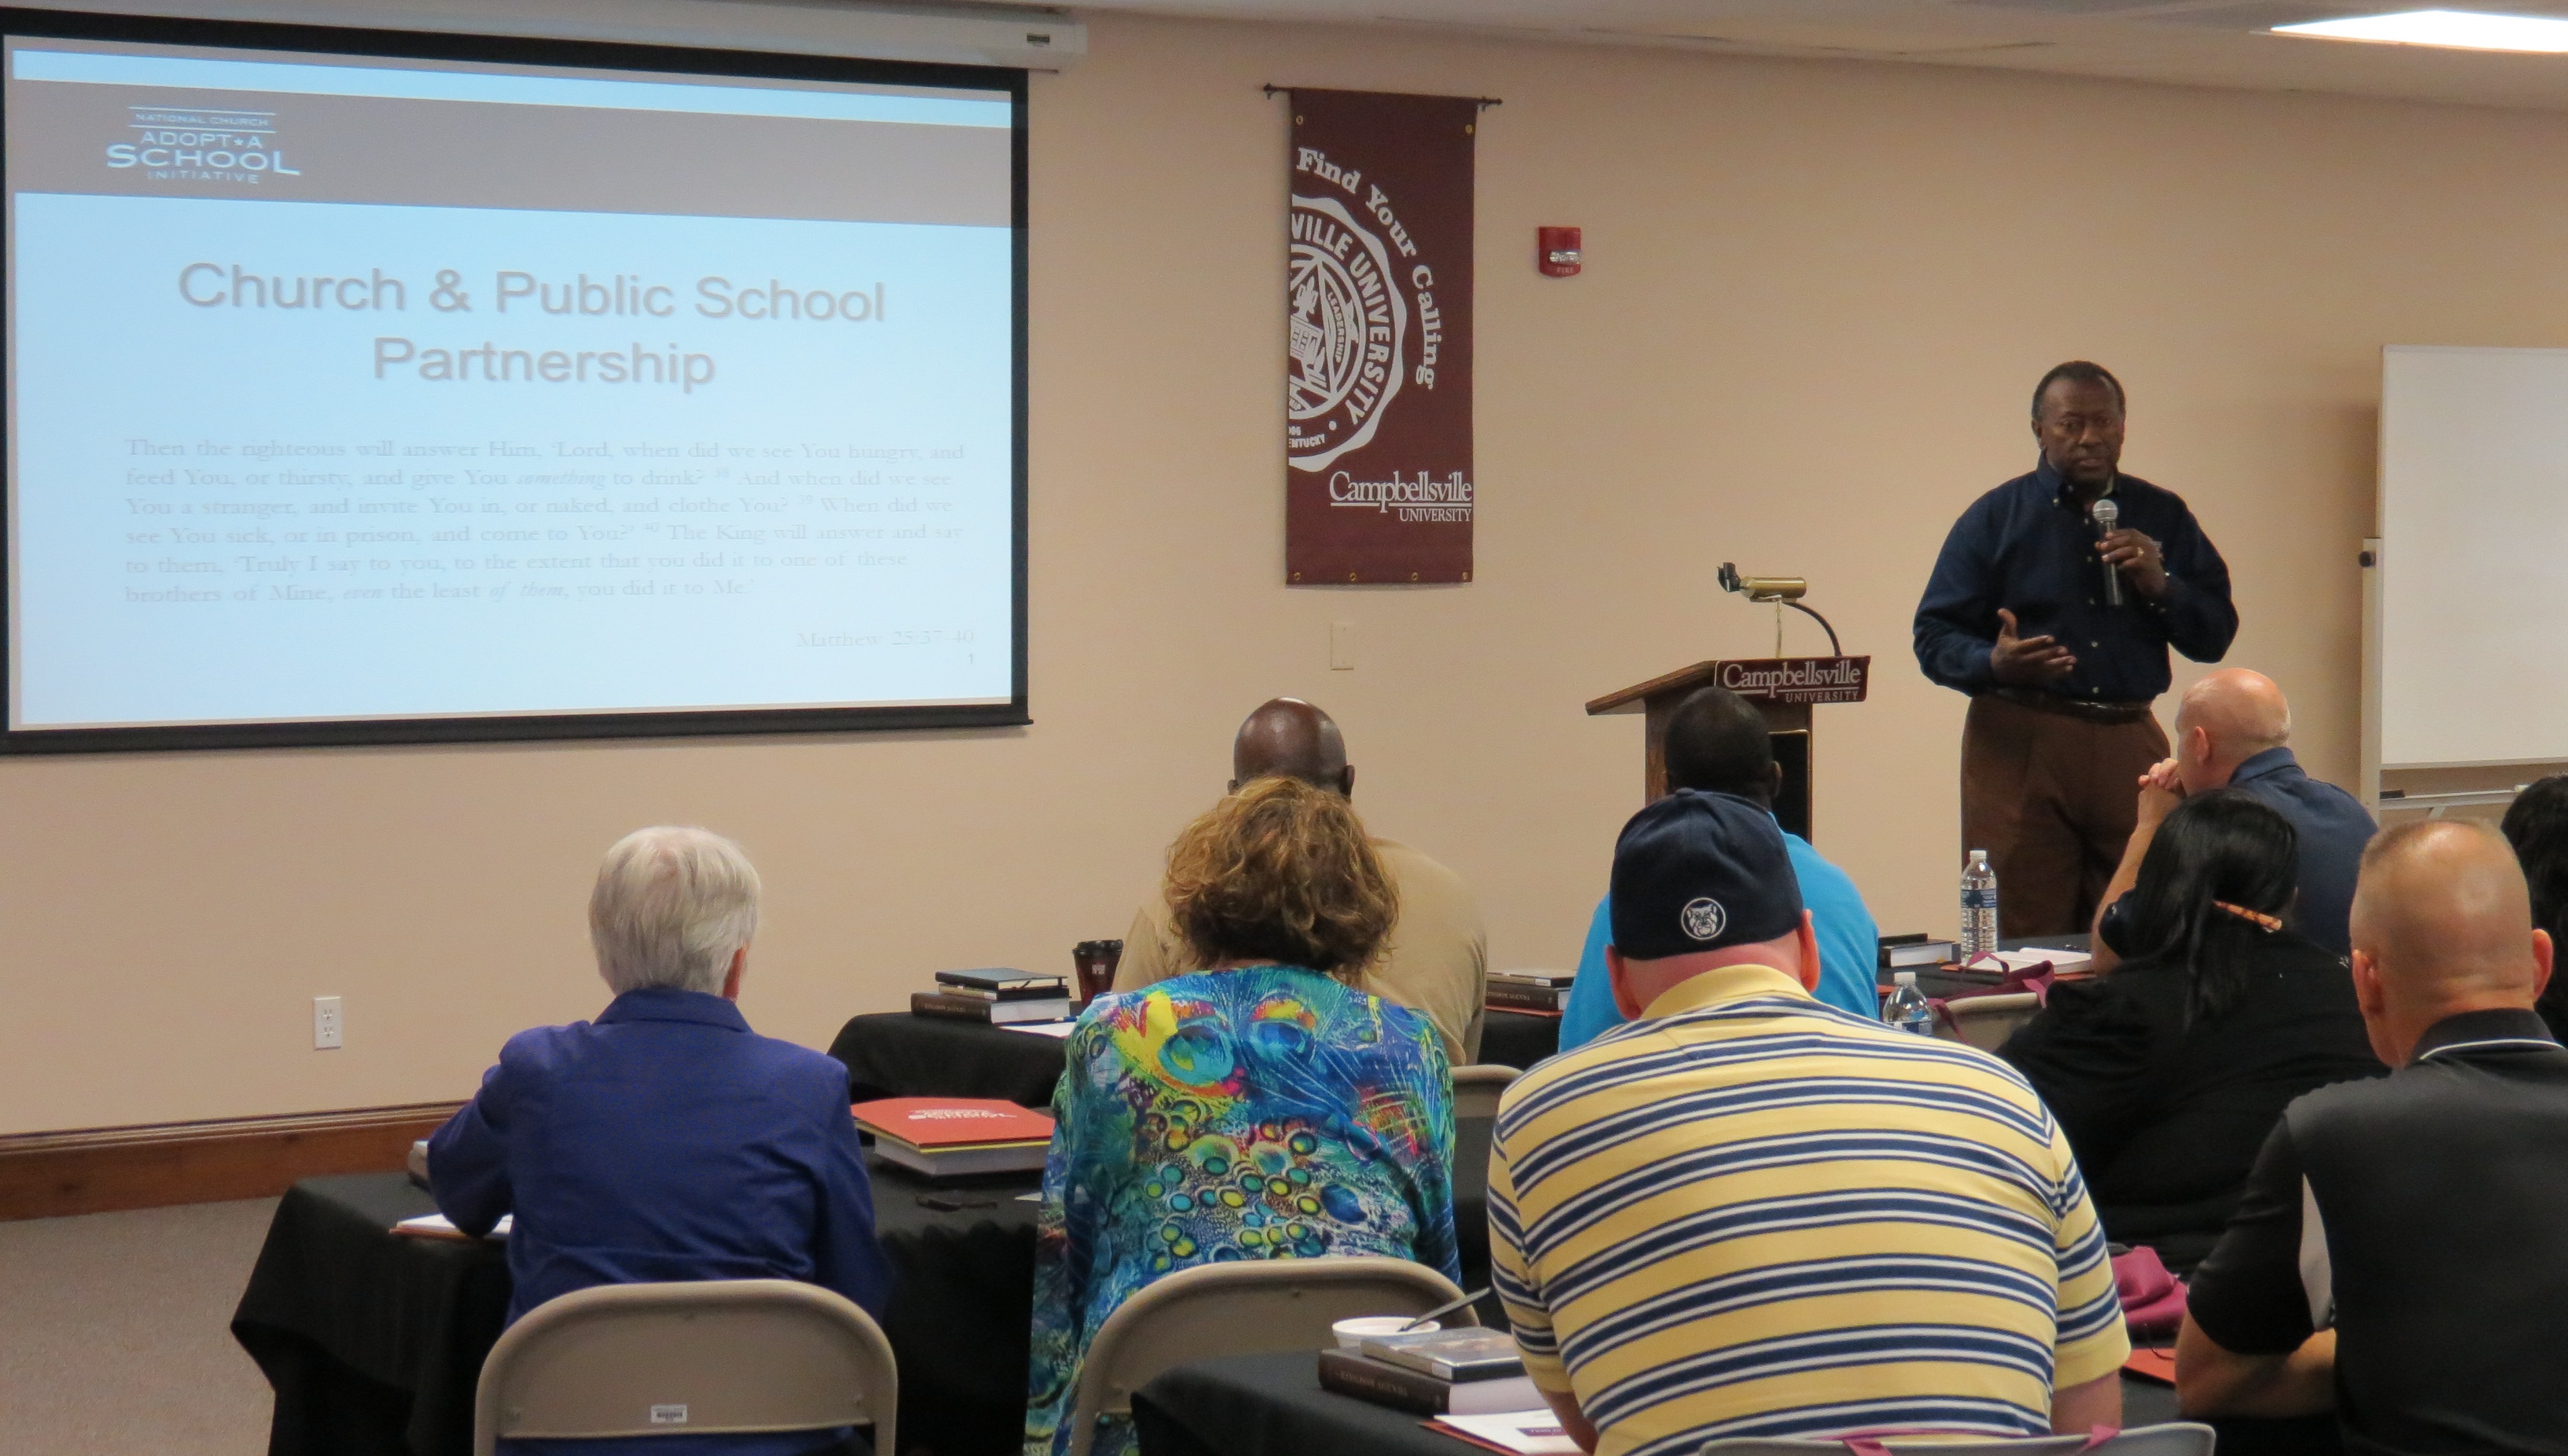 Bill Collins, vice president for The Urban Alternative, speaks to church and community leaders about church and public school partnership during the National Church Adopt-a-School Initiative workshop held at Campbellsville University’s Louisville Education Center.